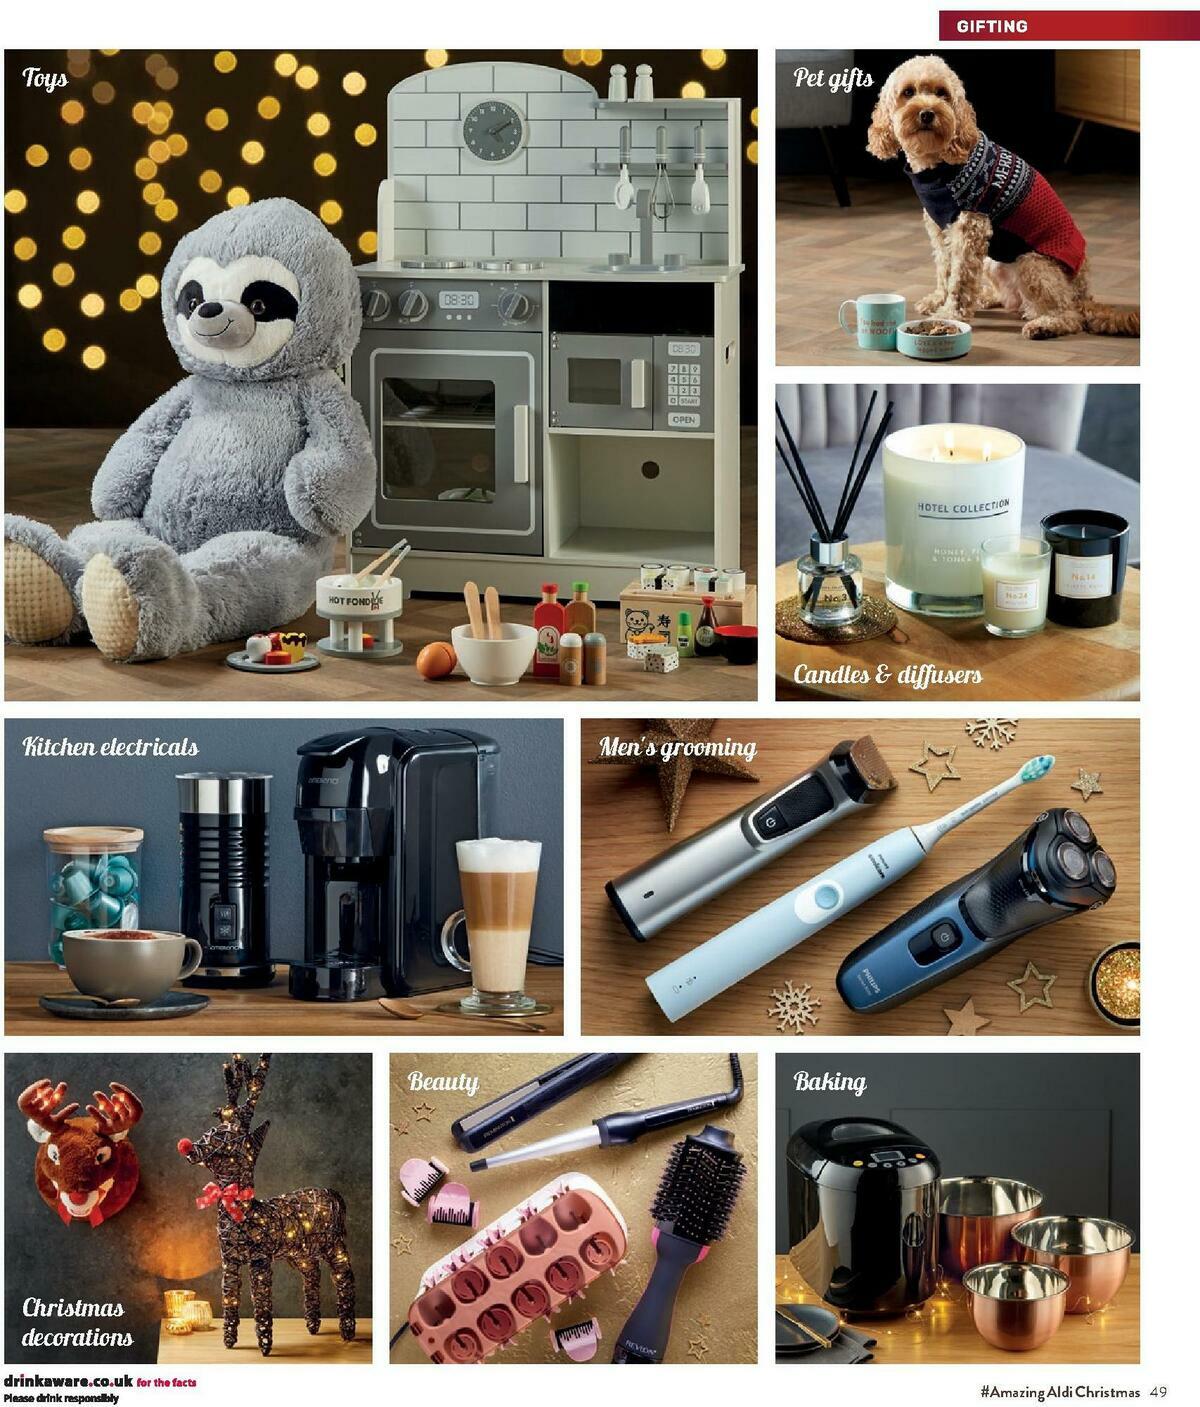 ALDI Christmas Brochure Offers from 8 November